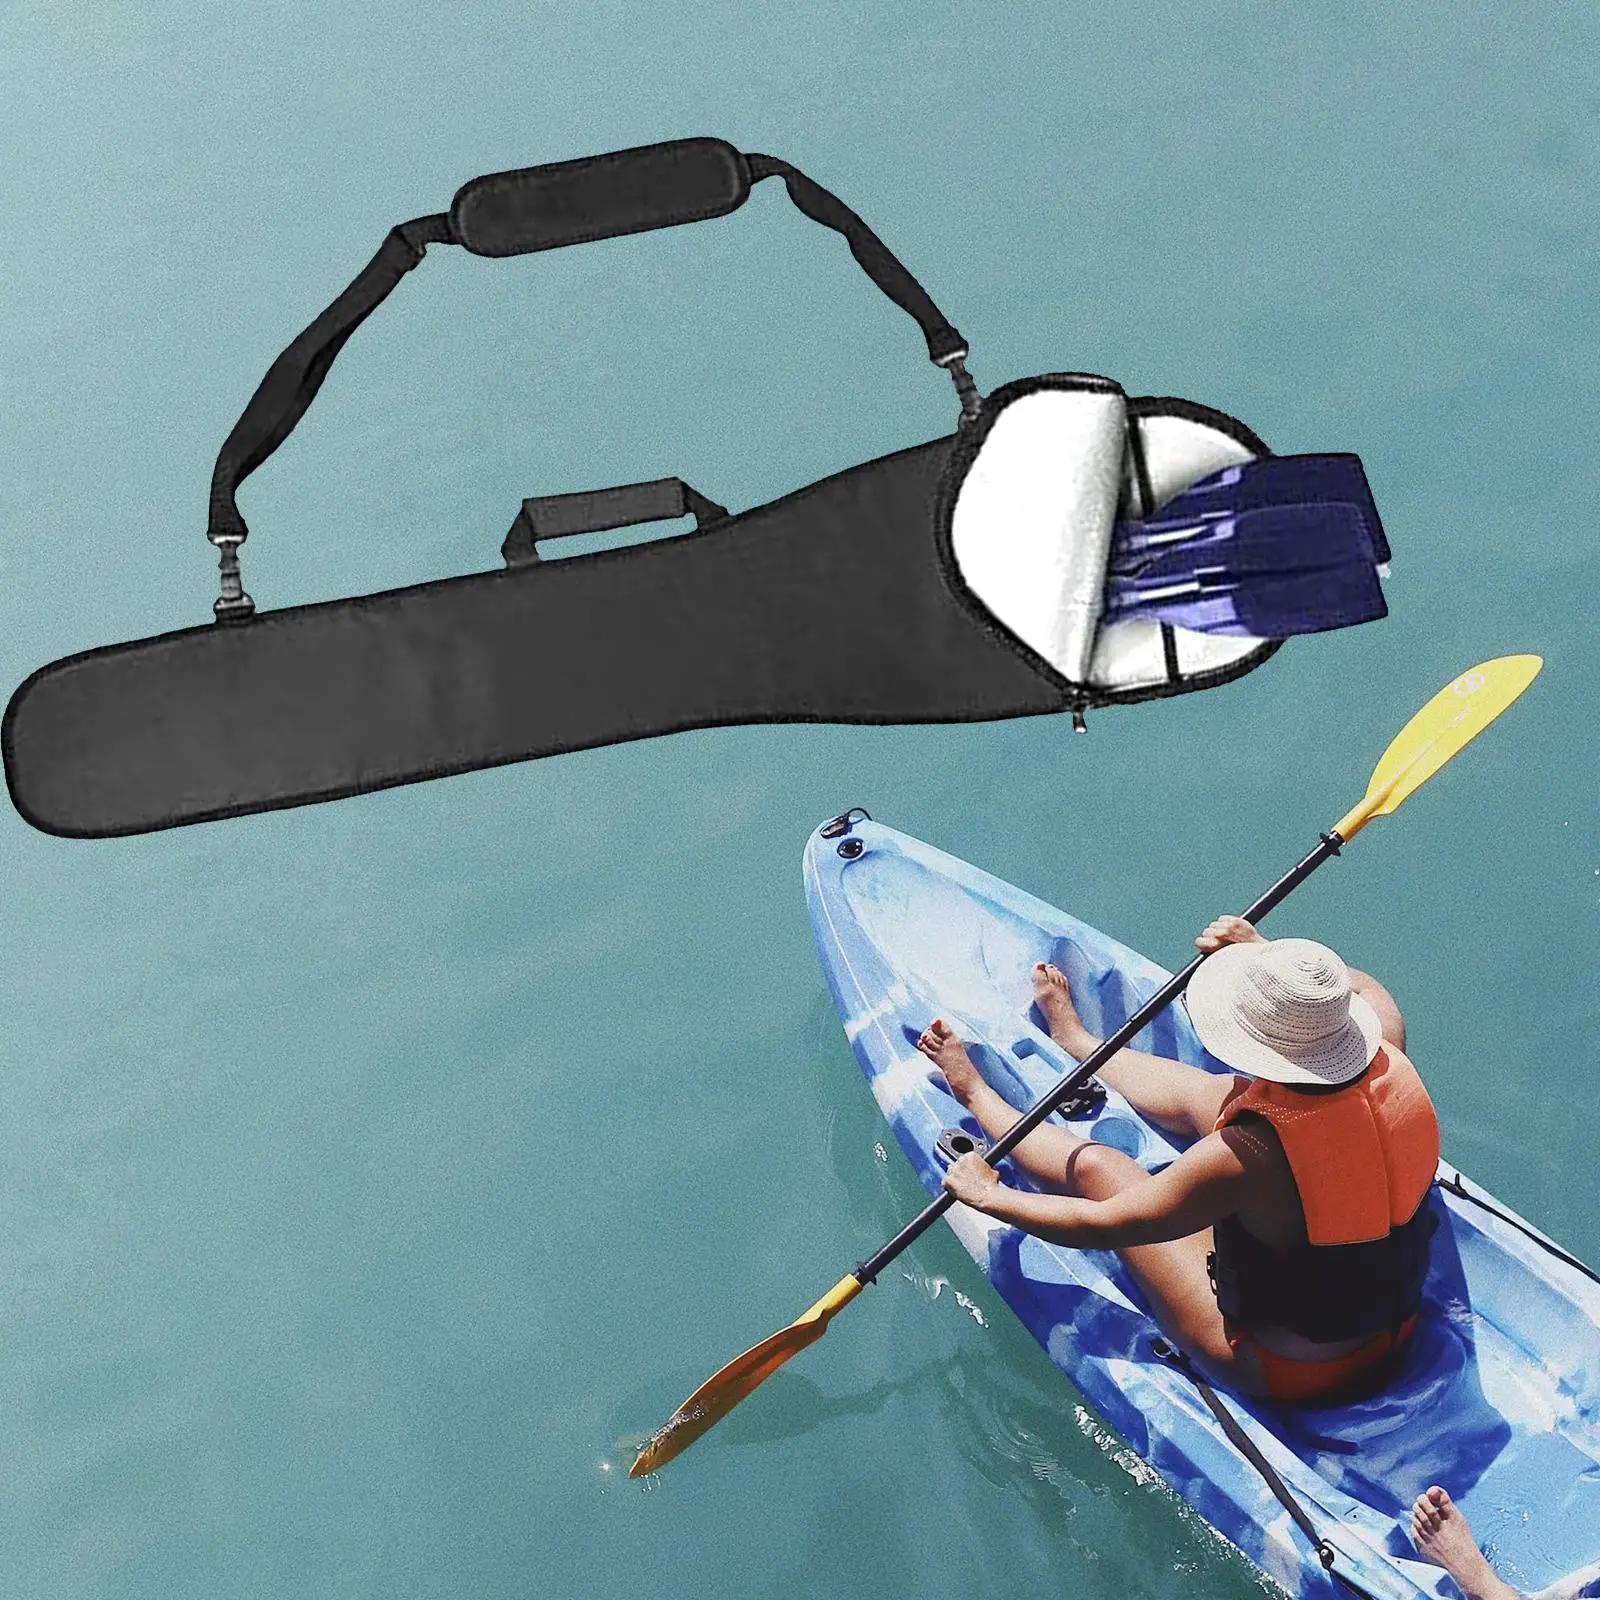 Durable Paddle Bag Oxford Fabric Split Shaft Paddles Cover Pouch Protect Your Paddle Tote Boat Paddle Storage Bag for Boat Canoe